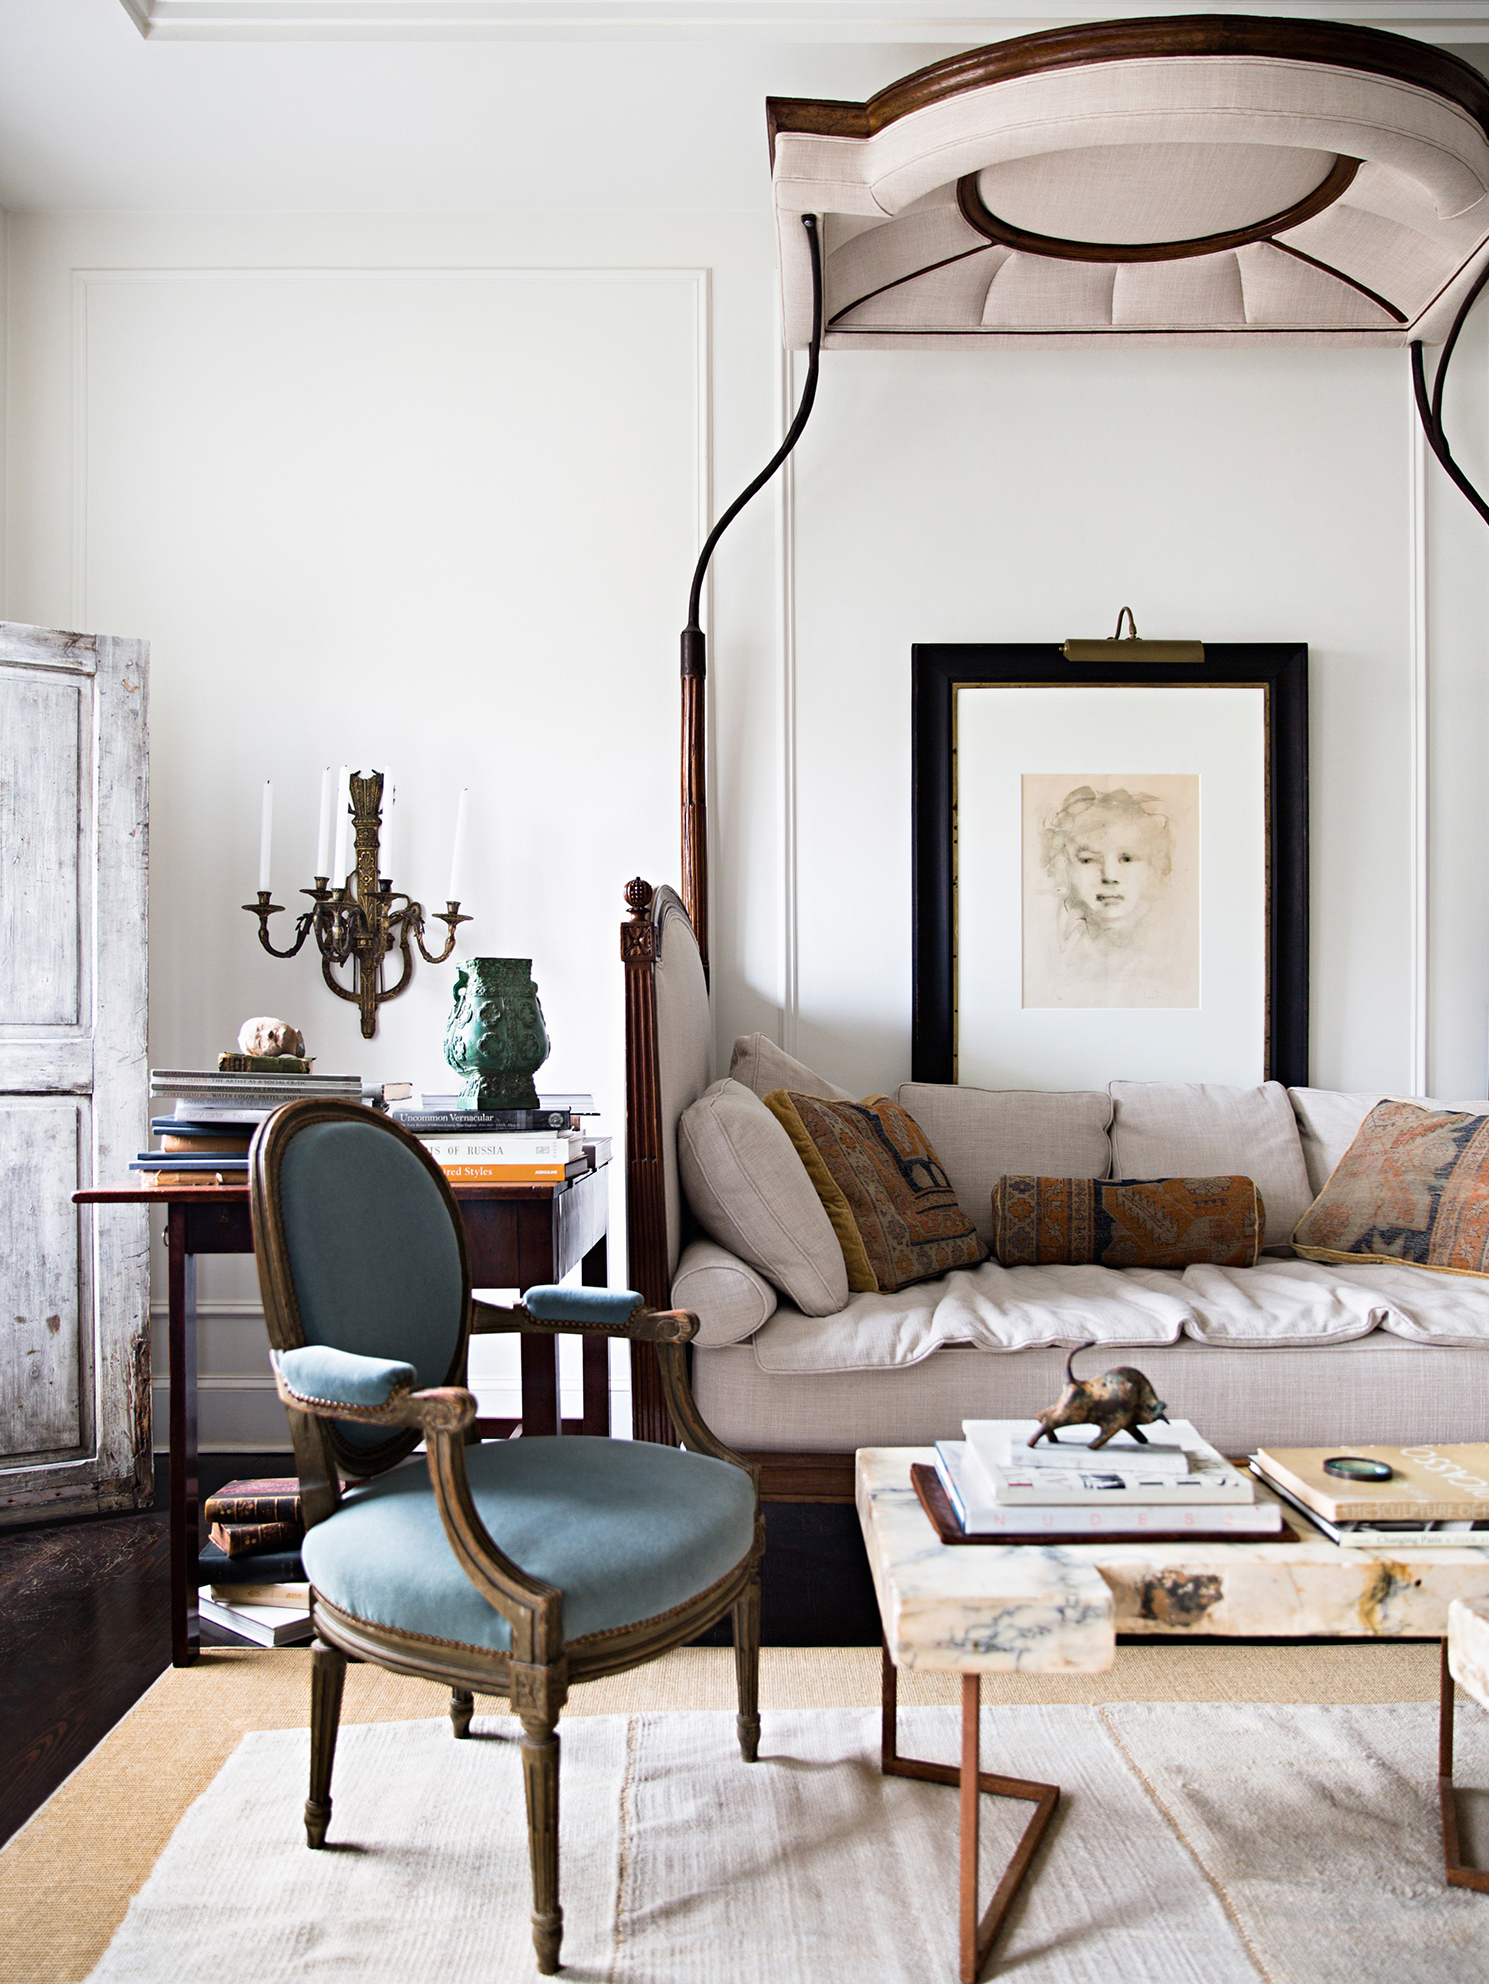 Interior Design by Darryl Carter | Beautiful Southern Homes